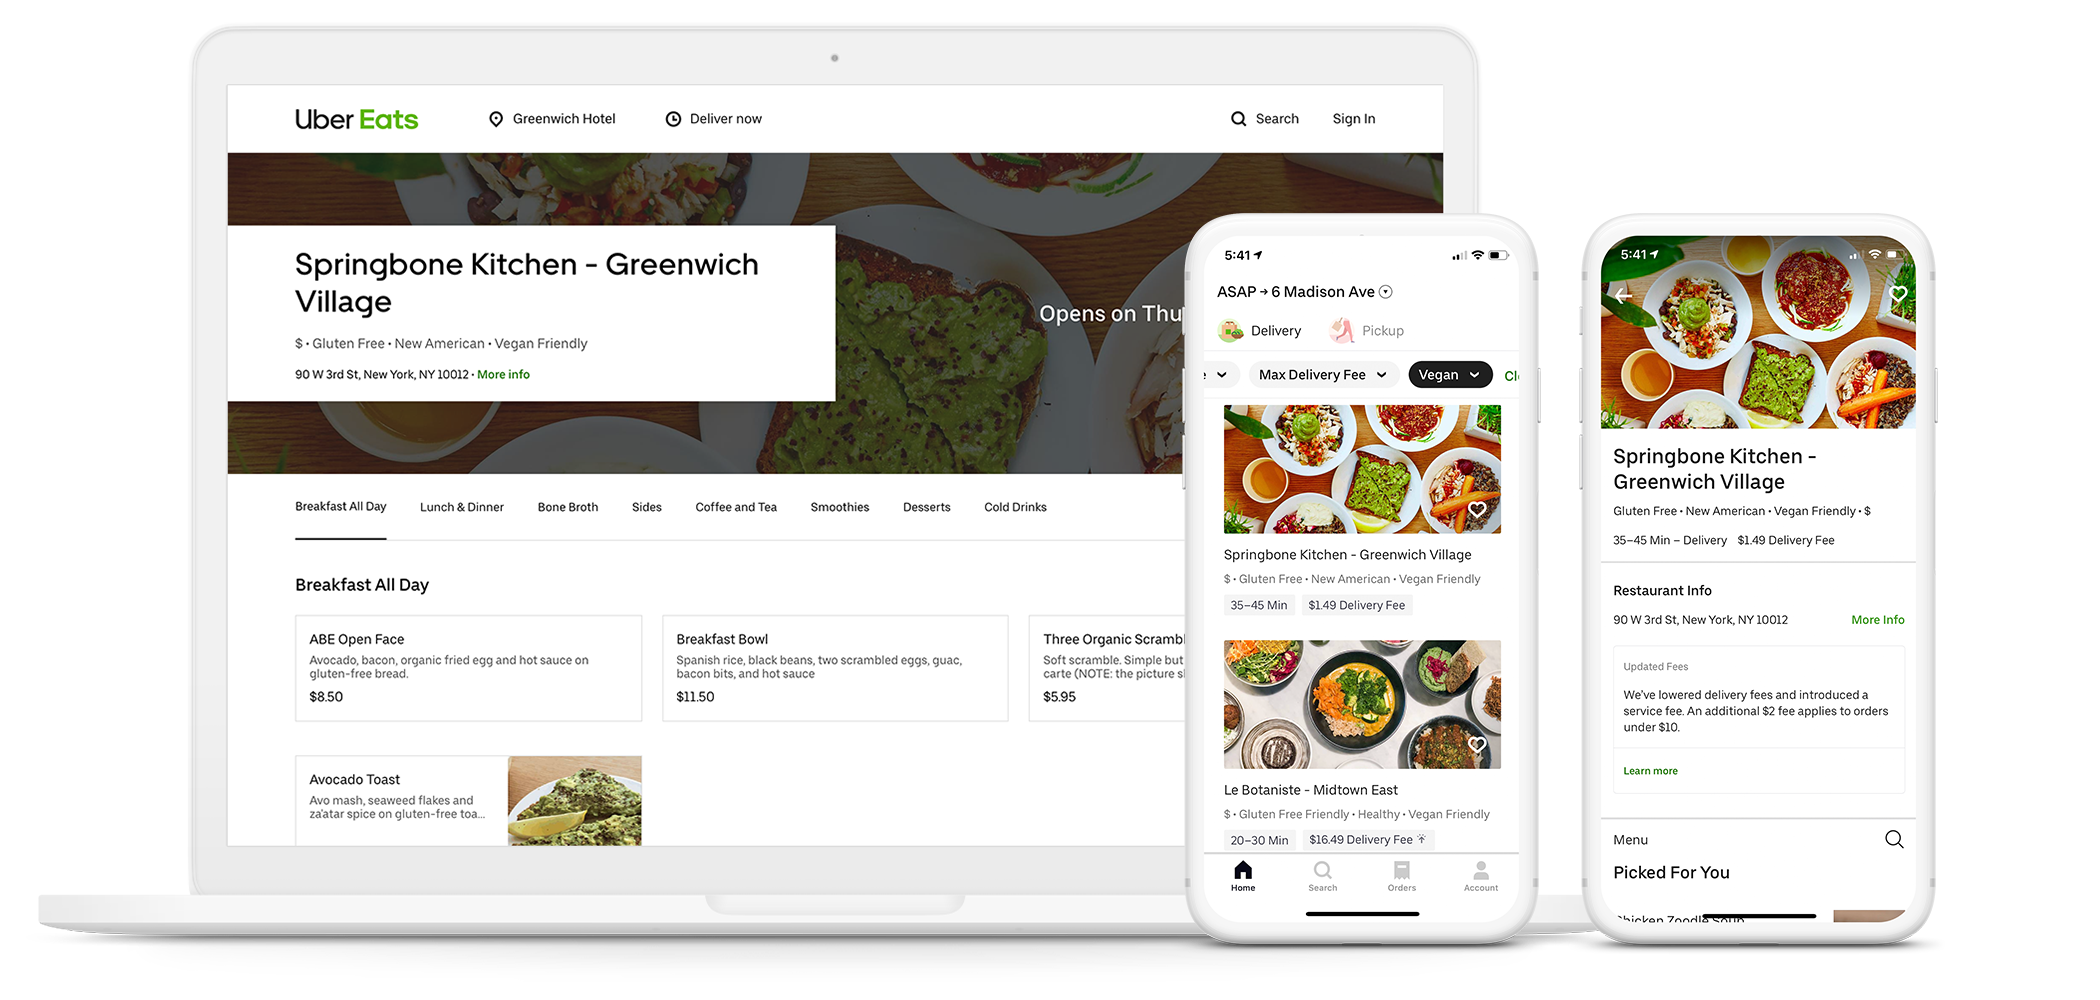 UberEats | Manage the Facts About Your Restaurant on UberEats